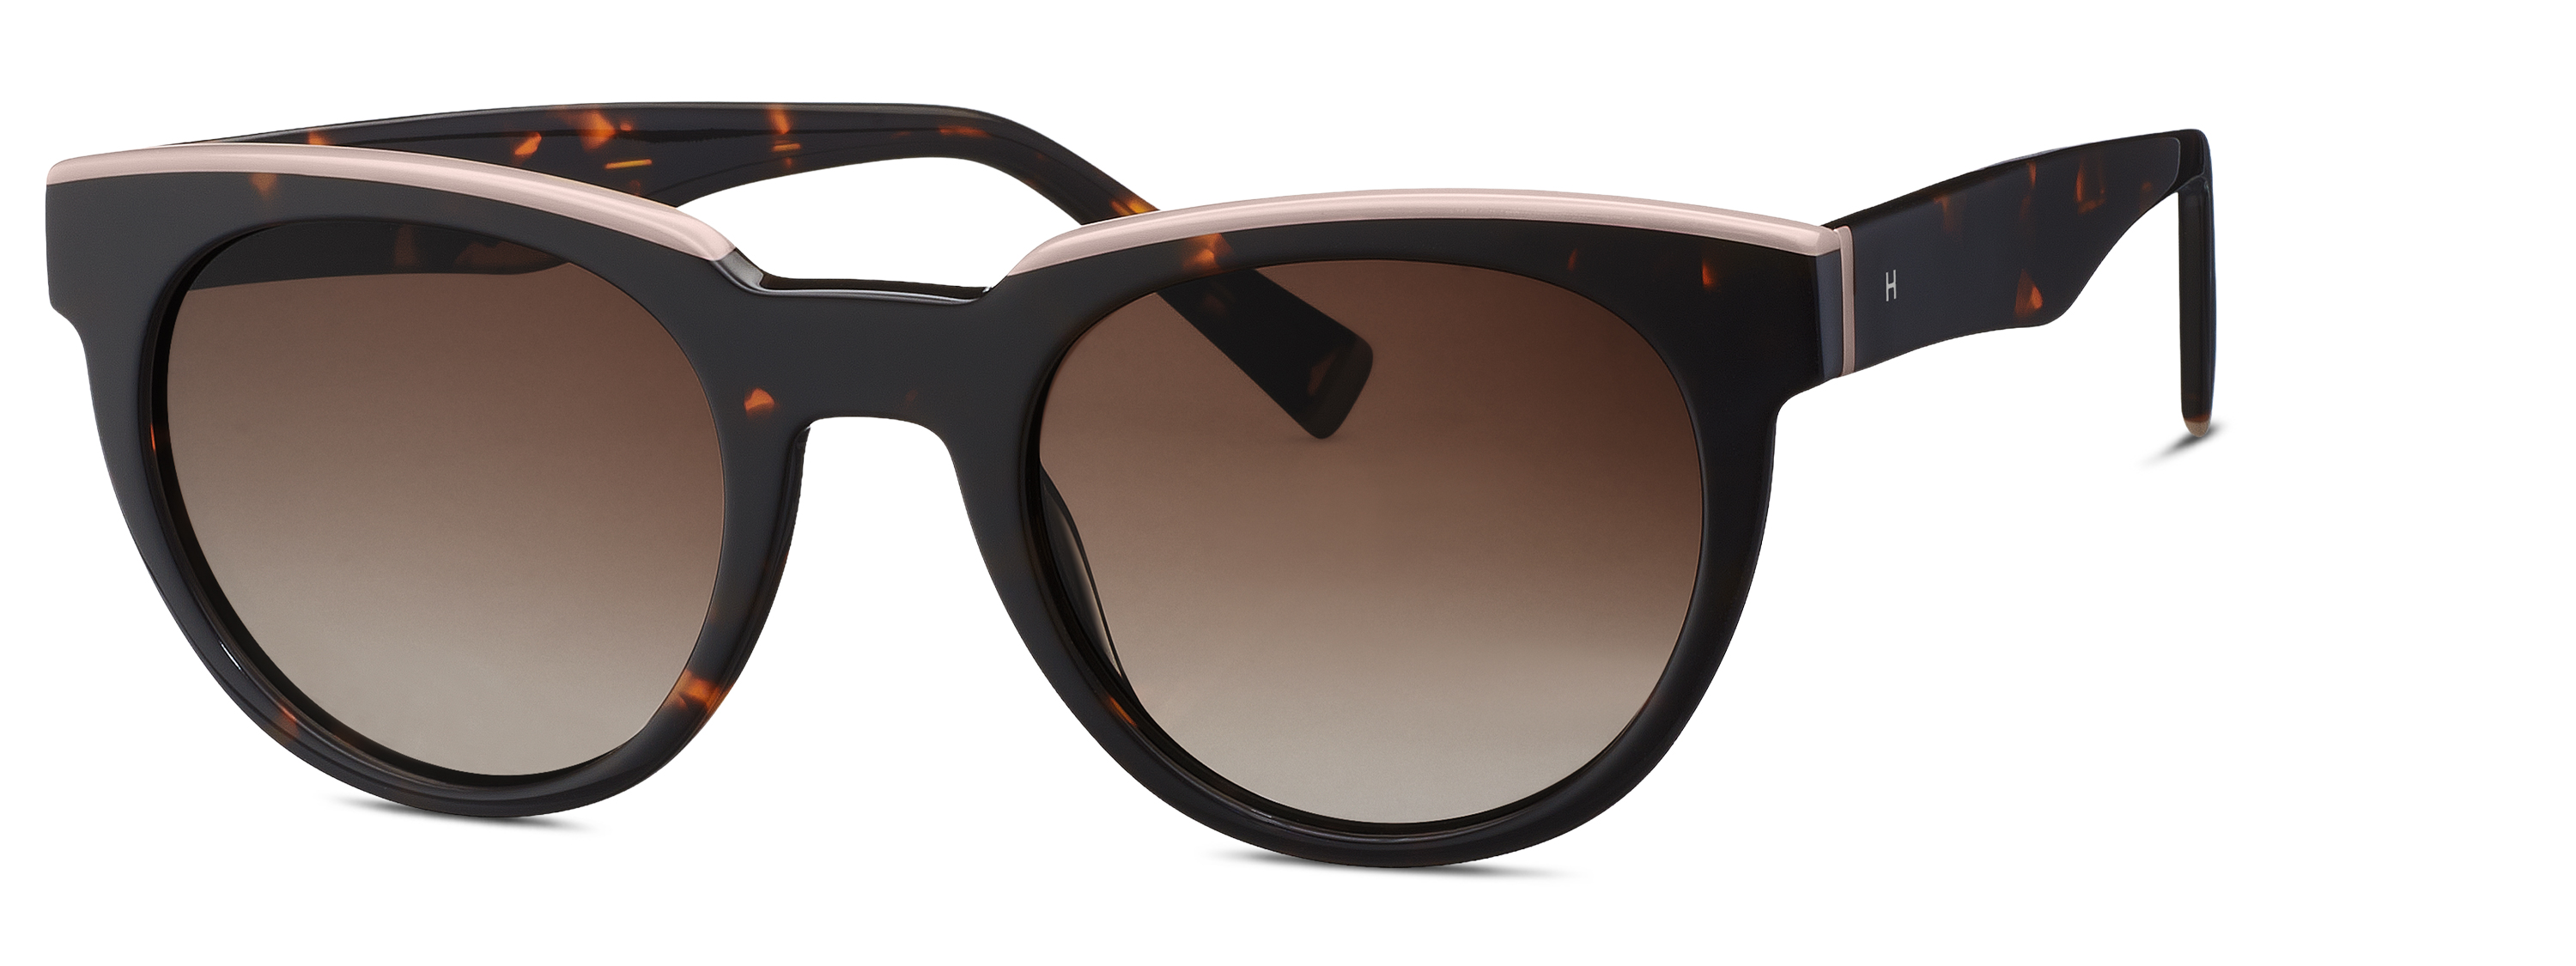 [products.image.front] HUMPHREY´S eyewear 588187 60 Sonnenbrille